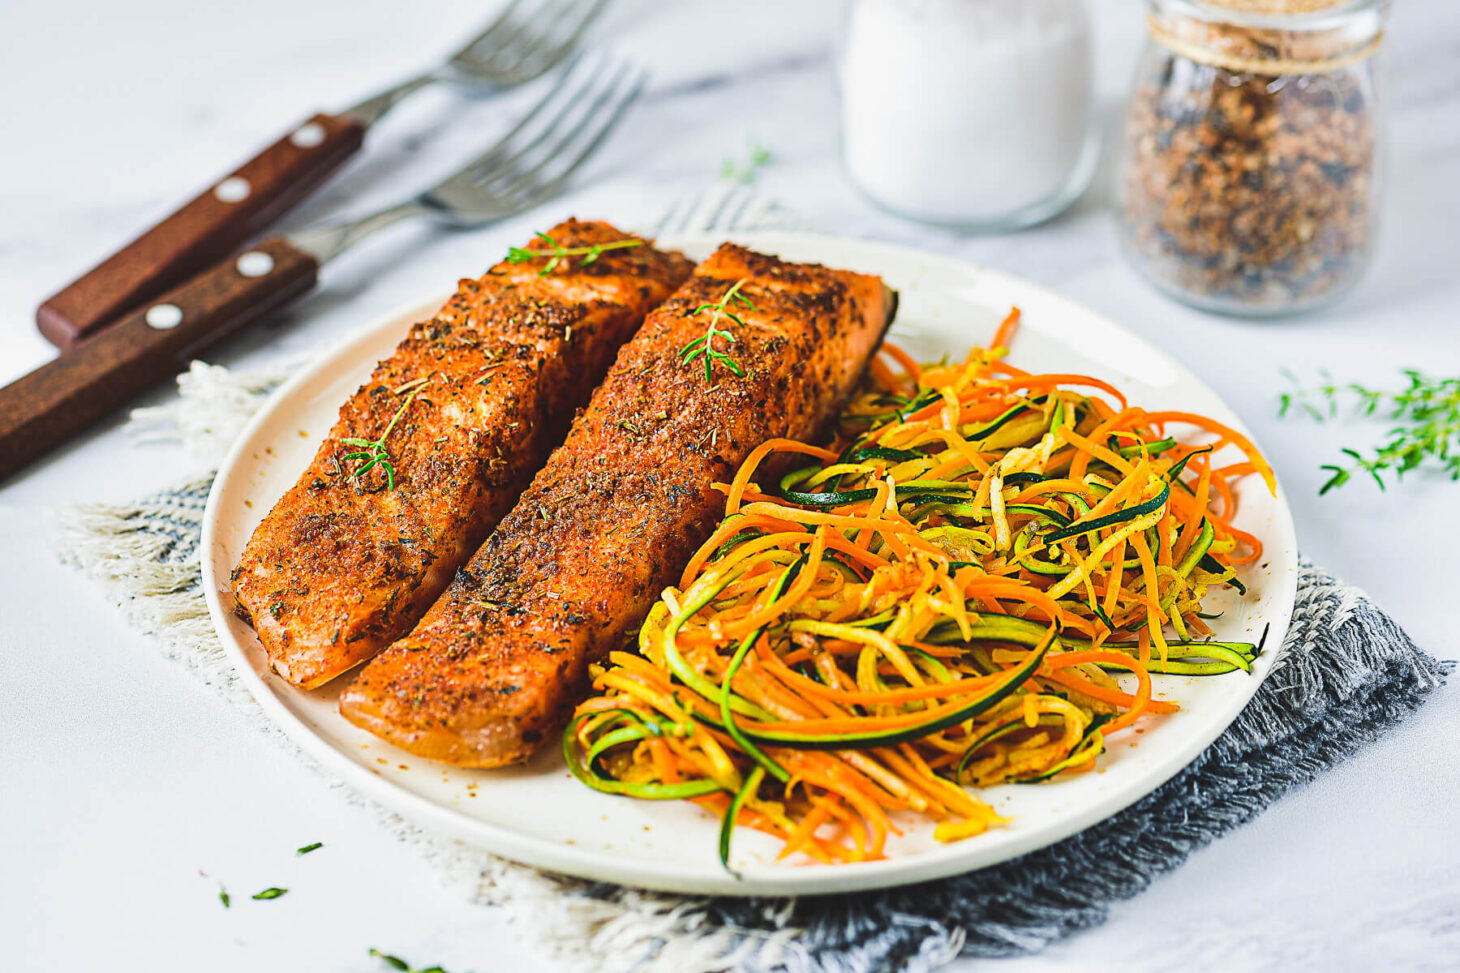 Cover photo for air fryer salmon recipe featuring two cooked spiced salmon fillets on a plate beside spiralized vegetables.